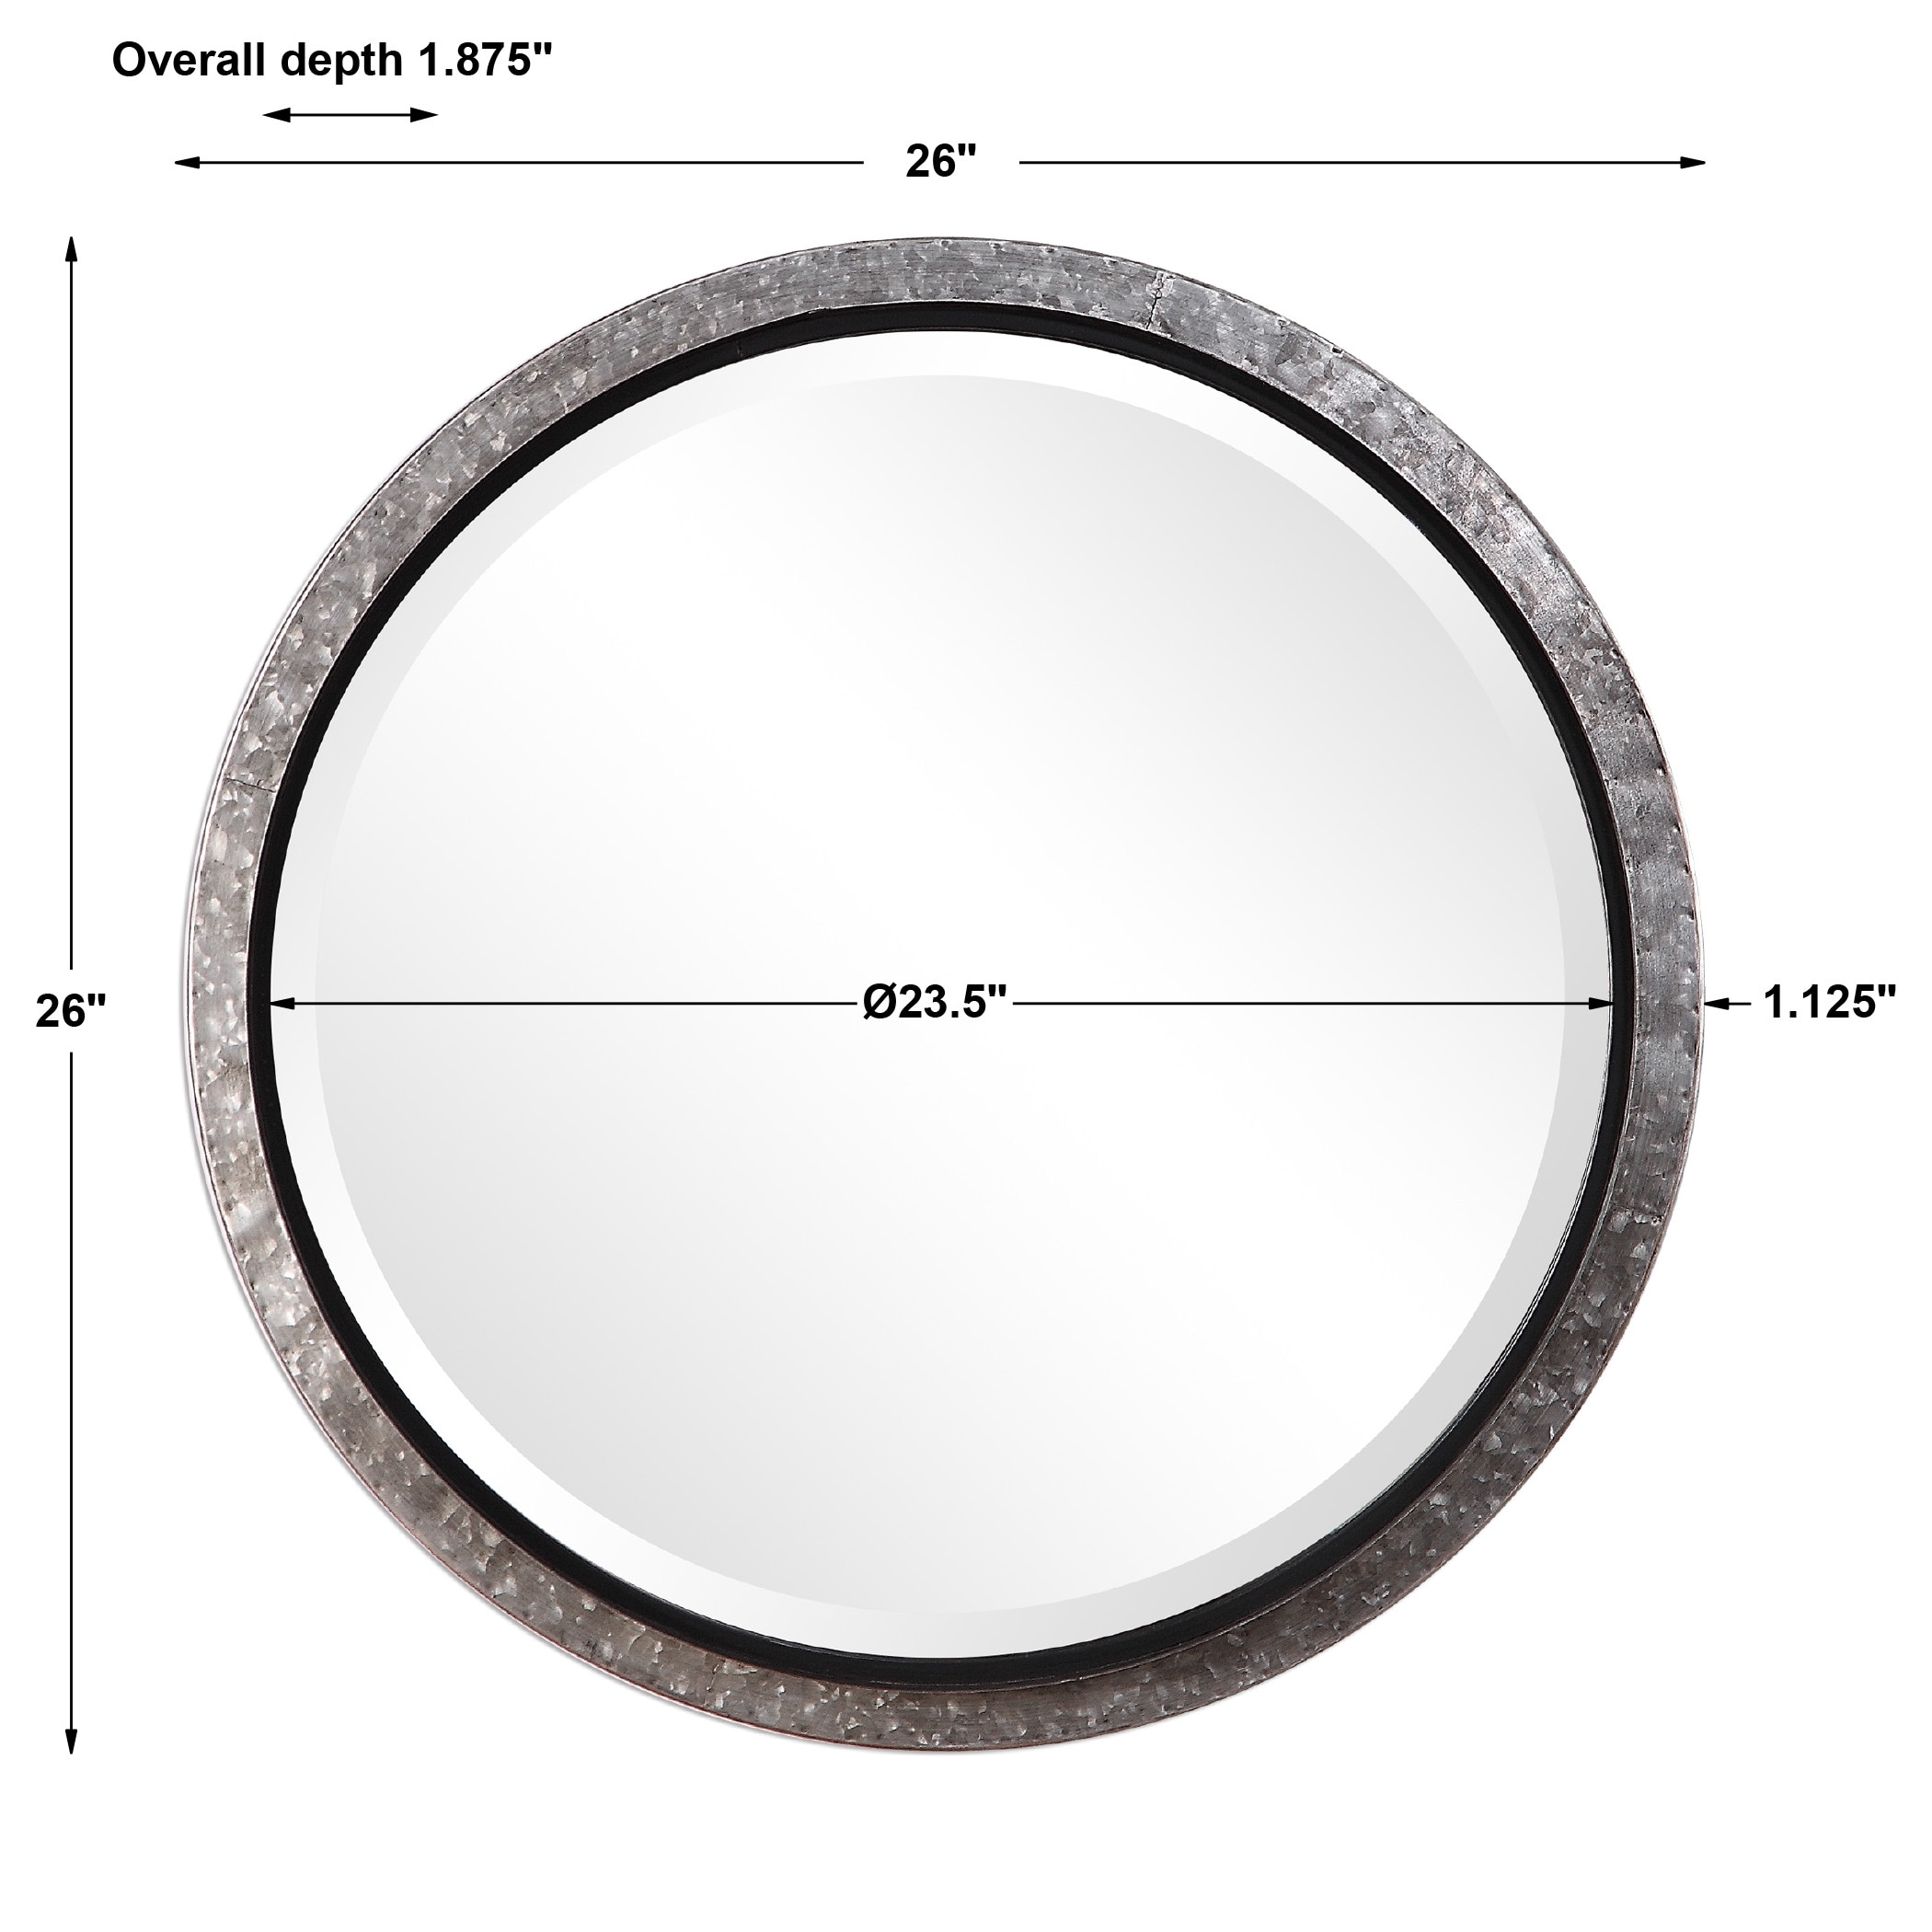 The Gray Barn Wilset Galvanized Metal and Nailhead Round Wall Mirror - Antique Silver - 26x26x1.875